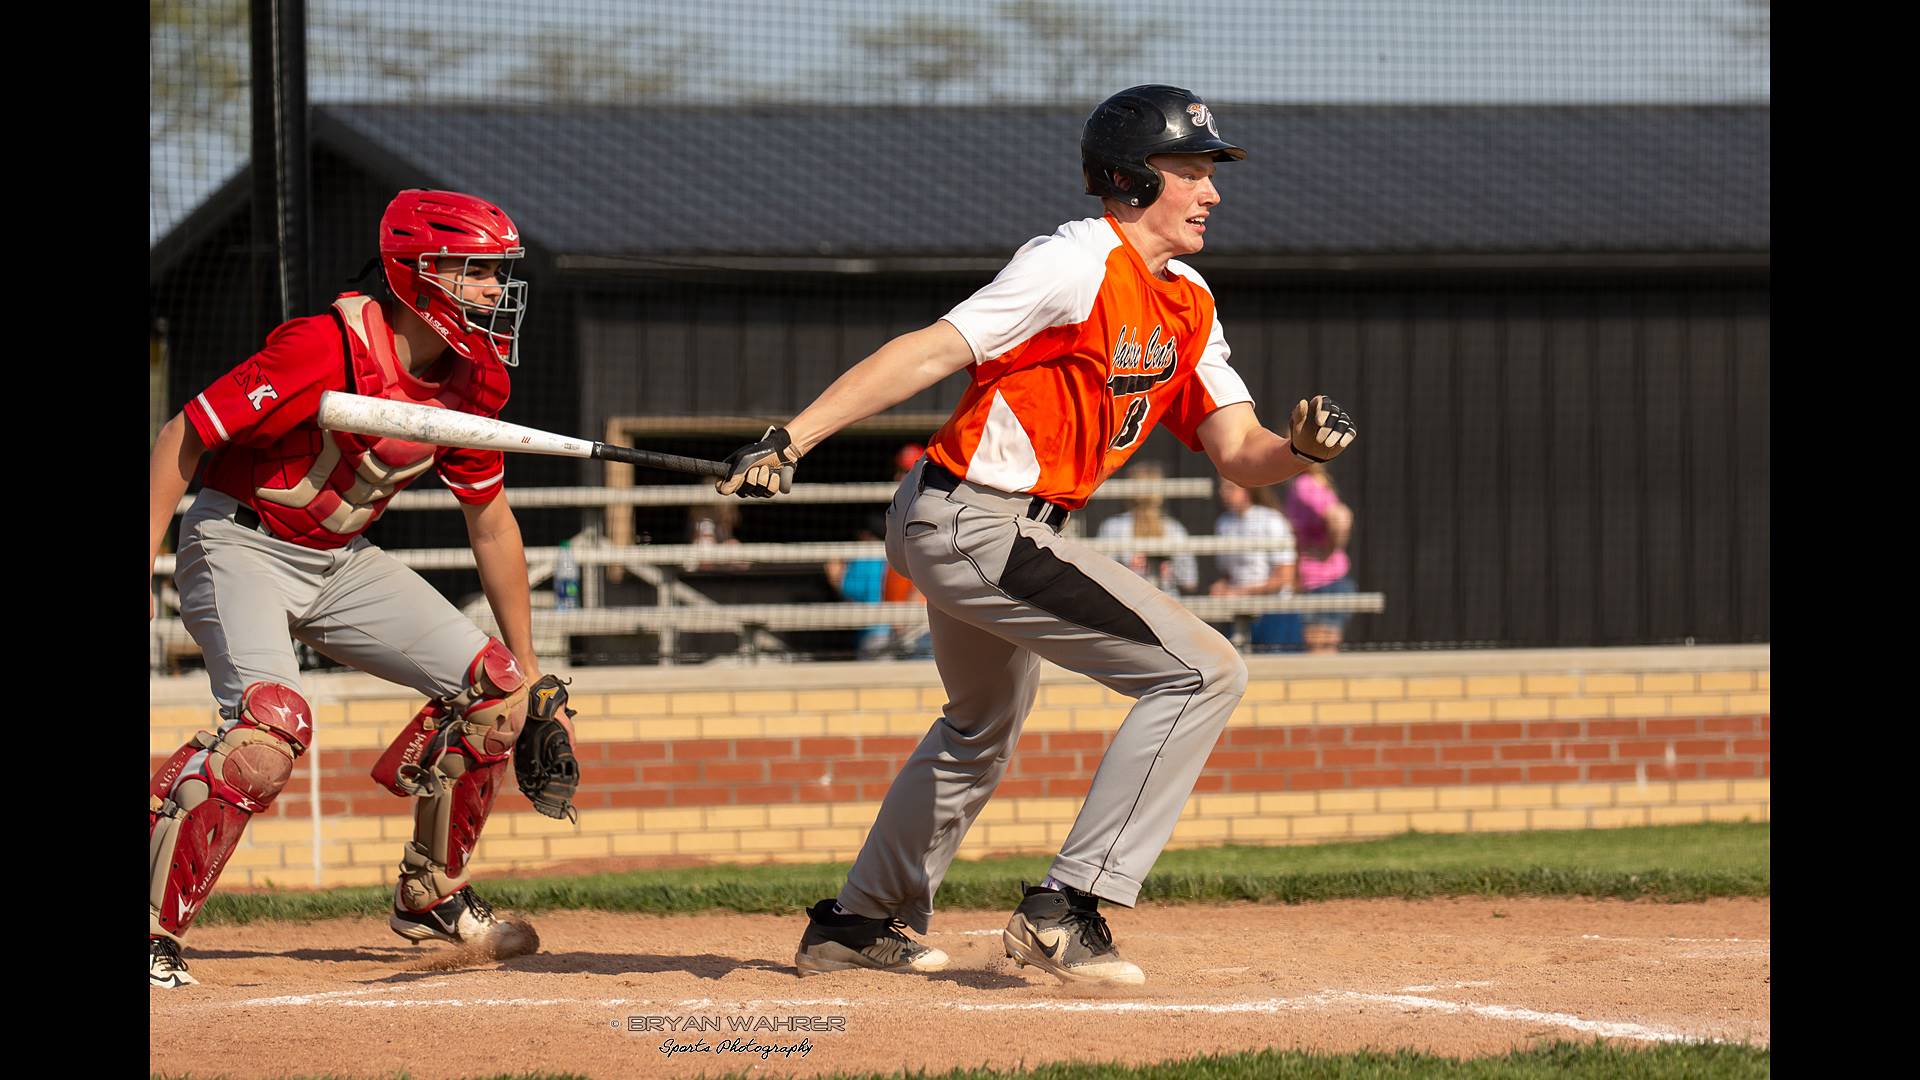 baseball player heading for first base